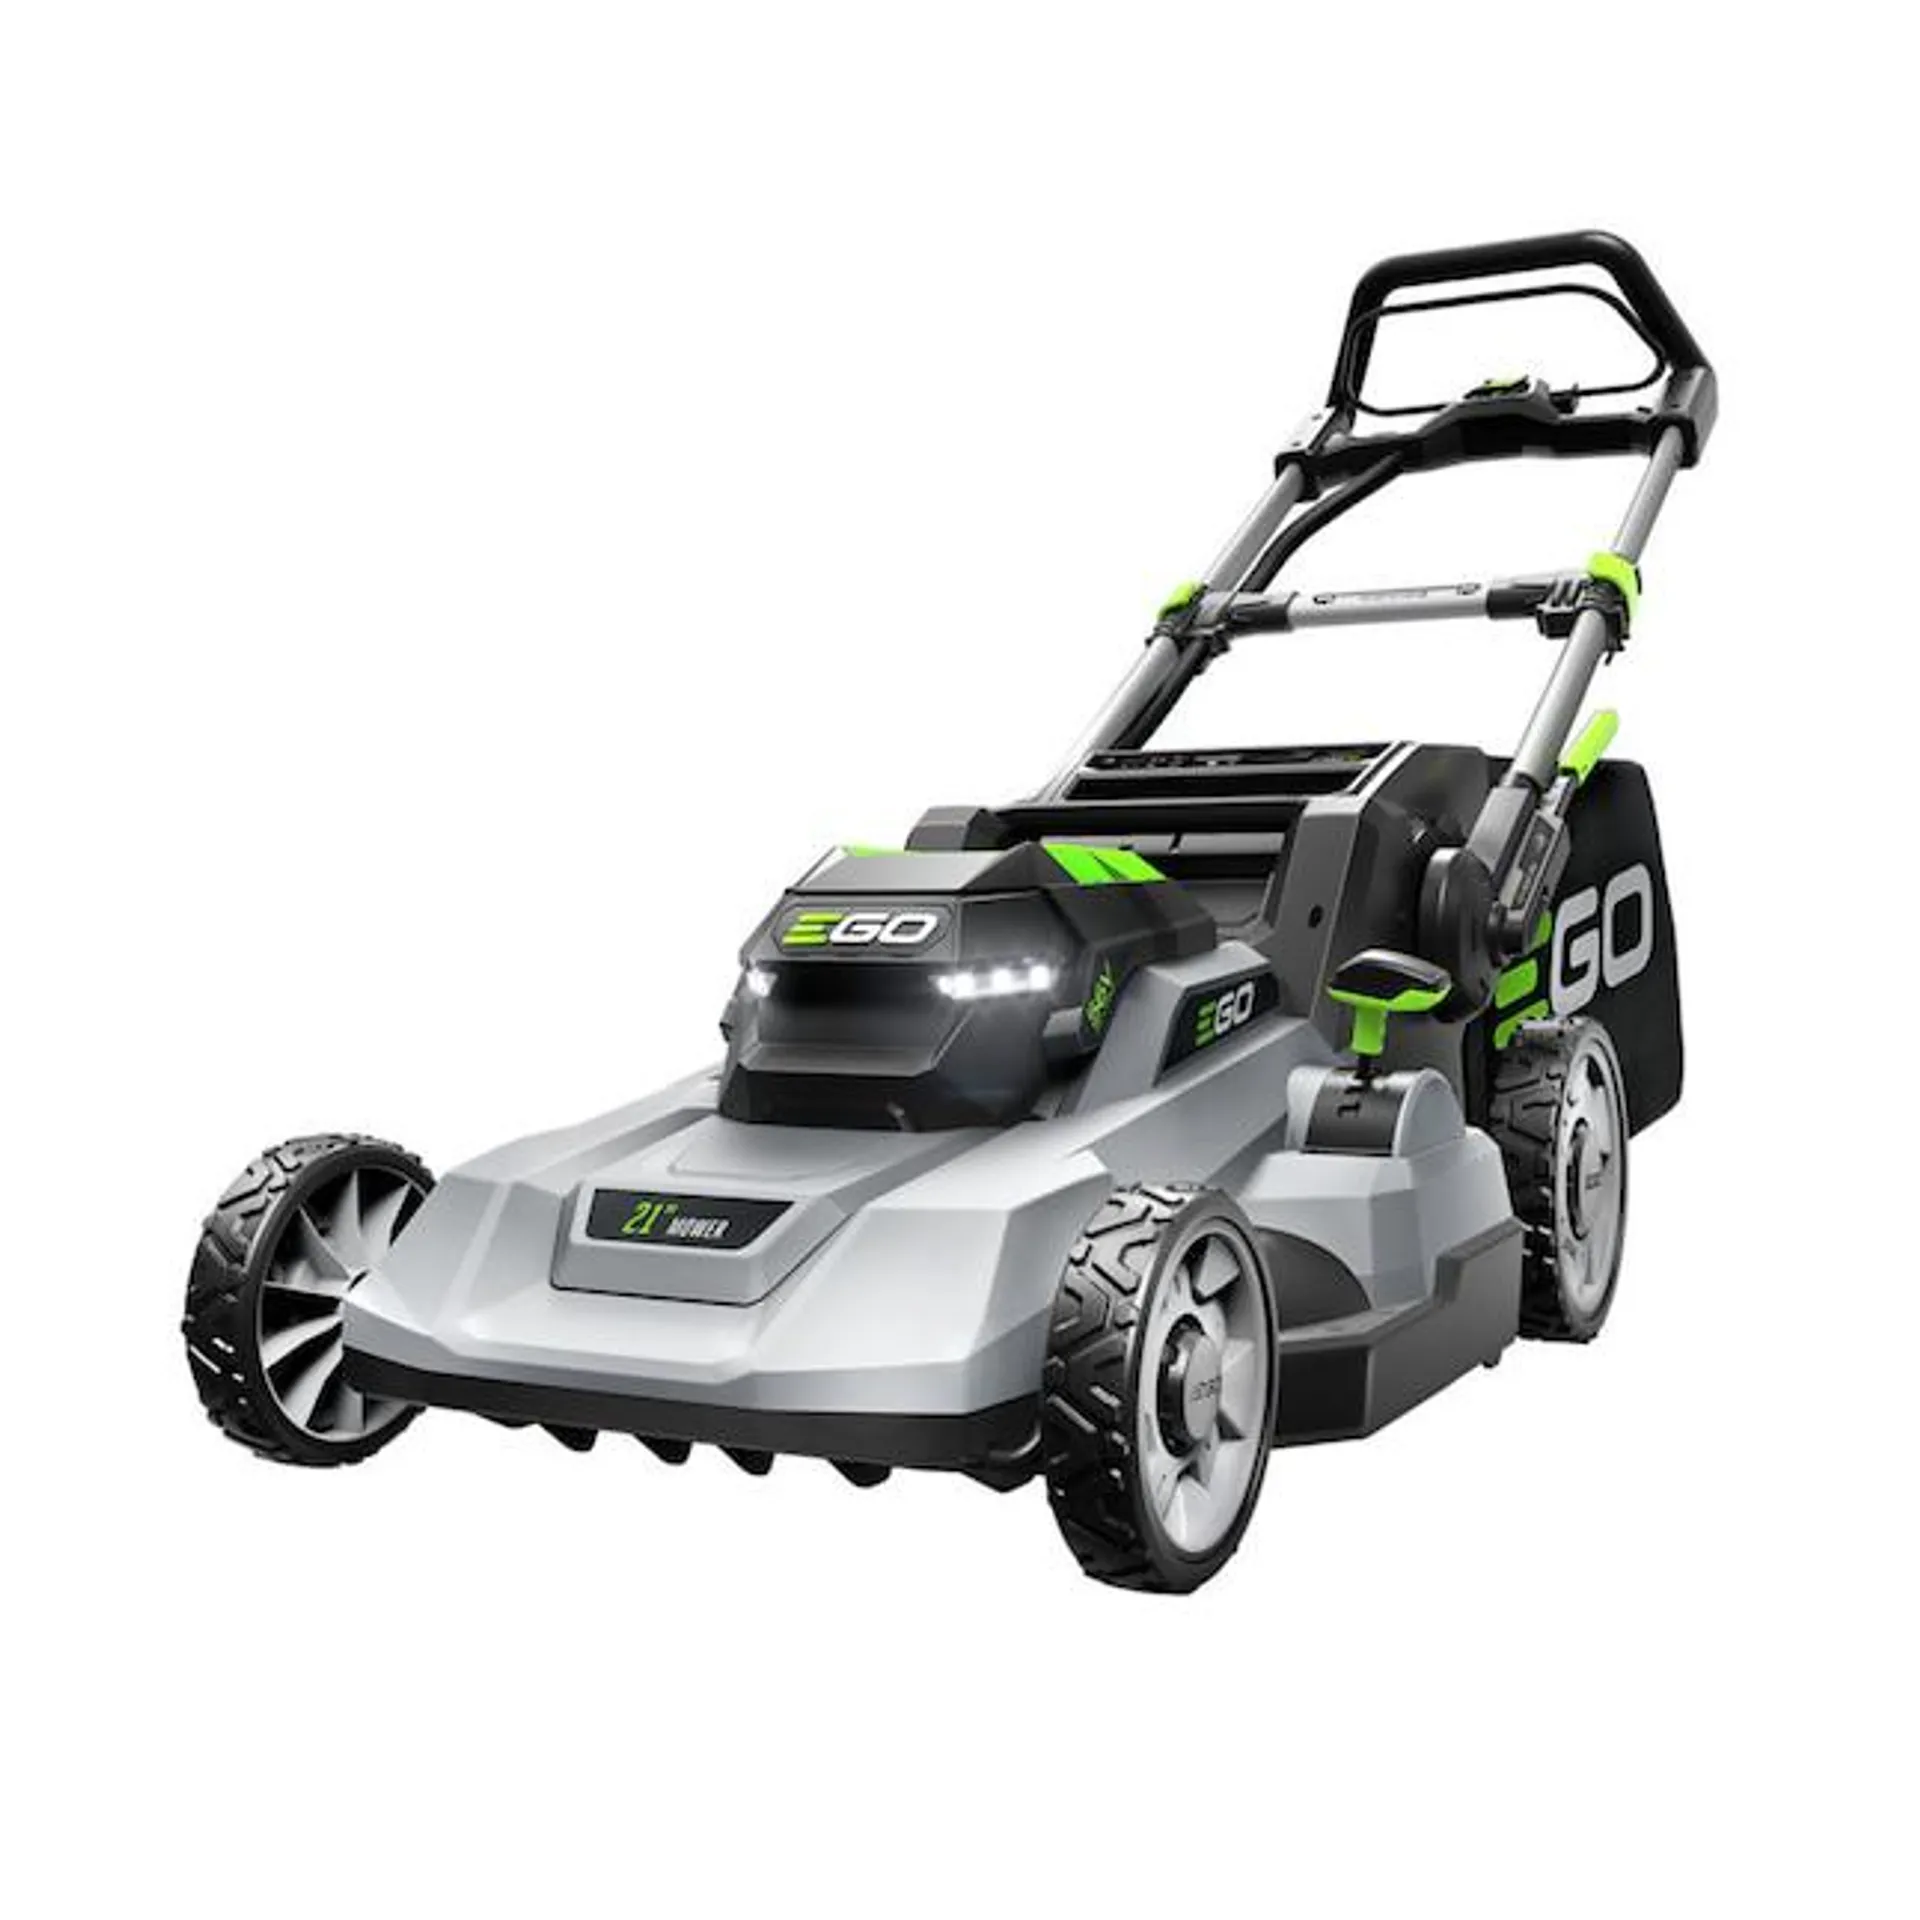 EGO POWER+ 56-volt 21-in Cordless Push Lawn Mower 6 Ah (1-Battery and Charger Included)